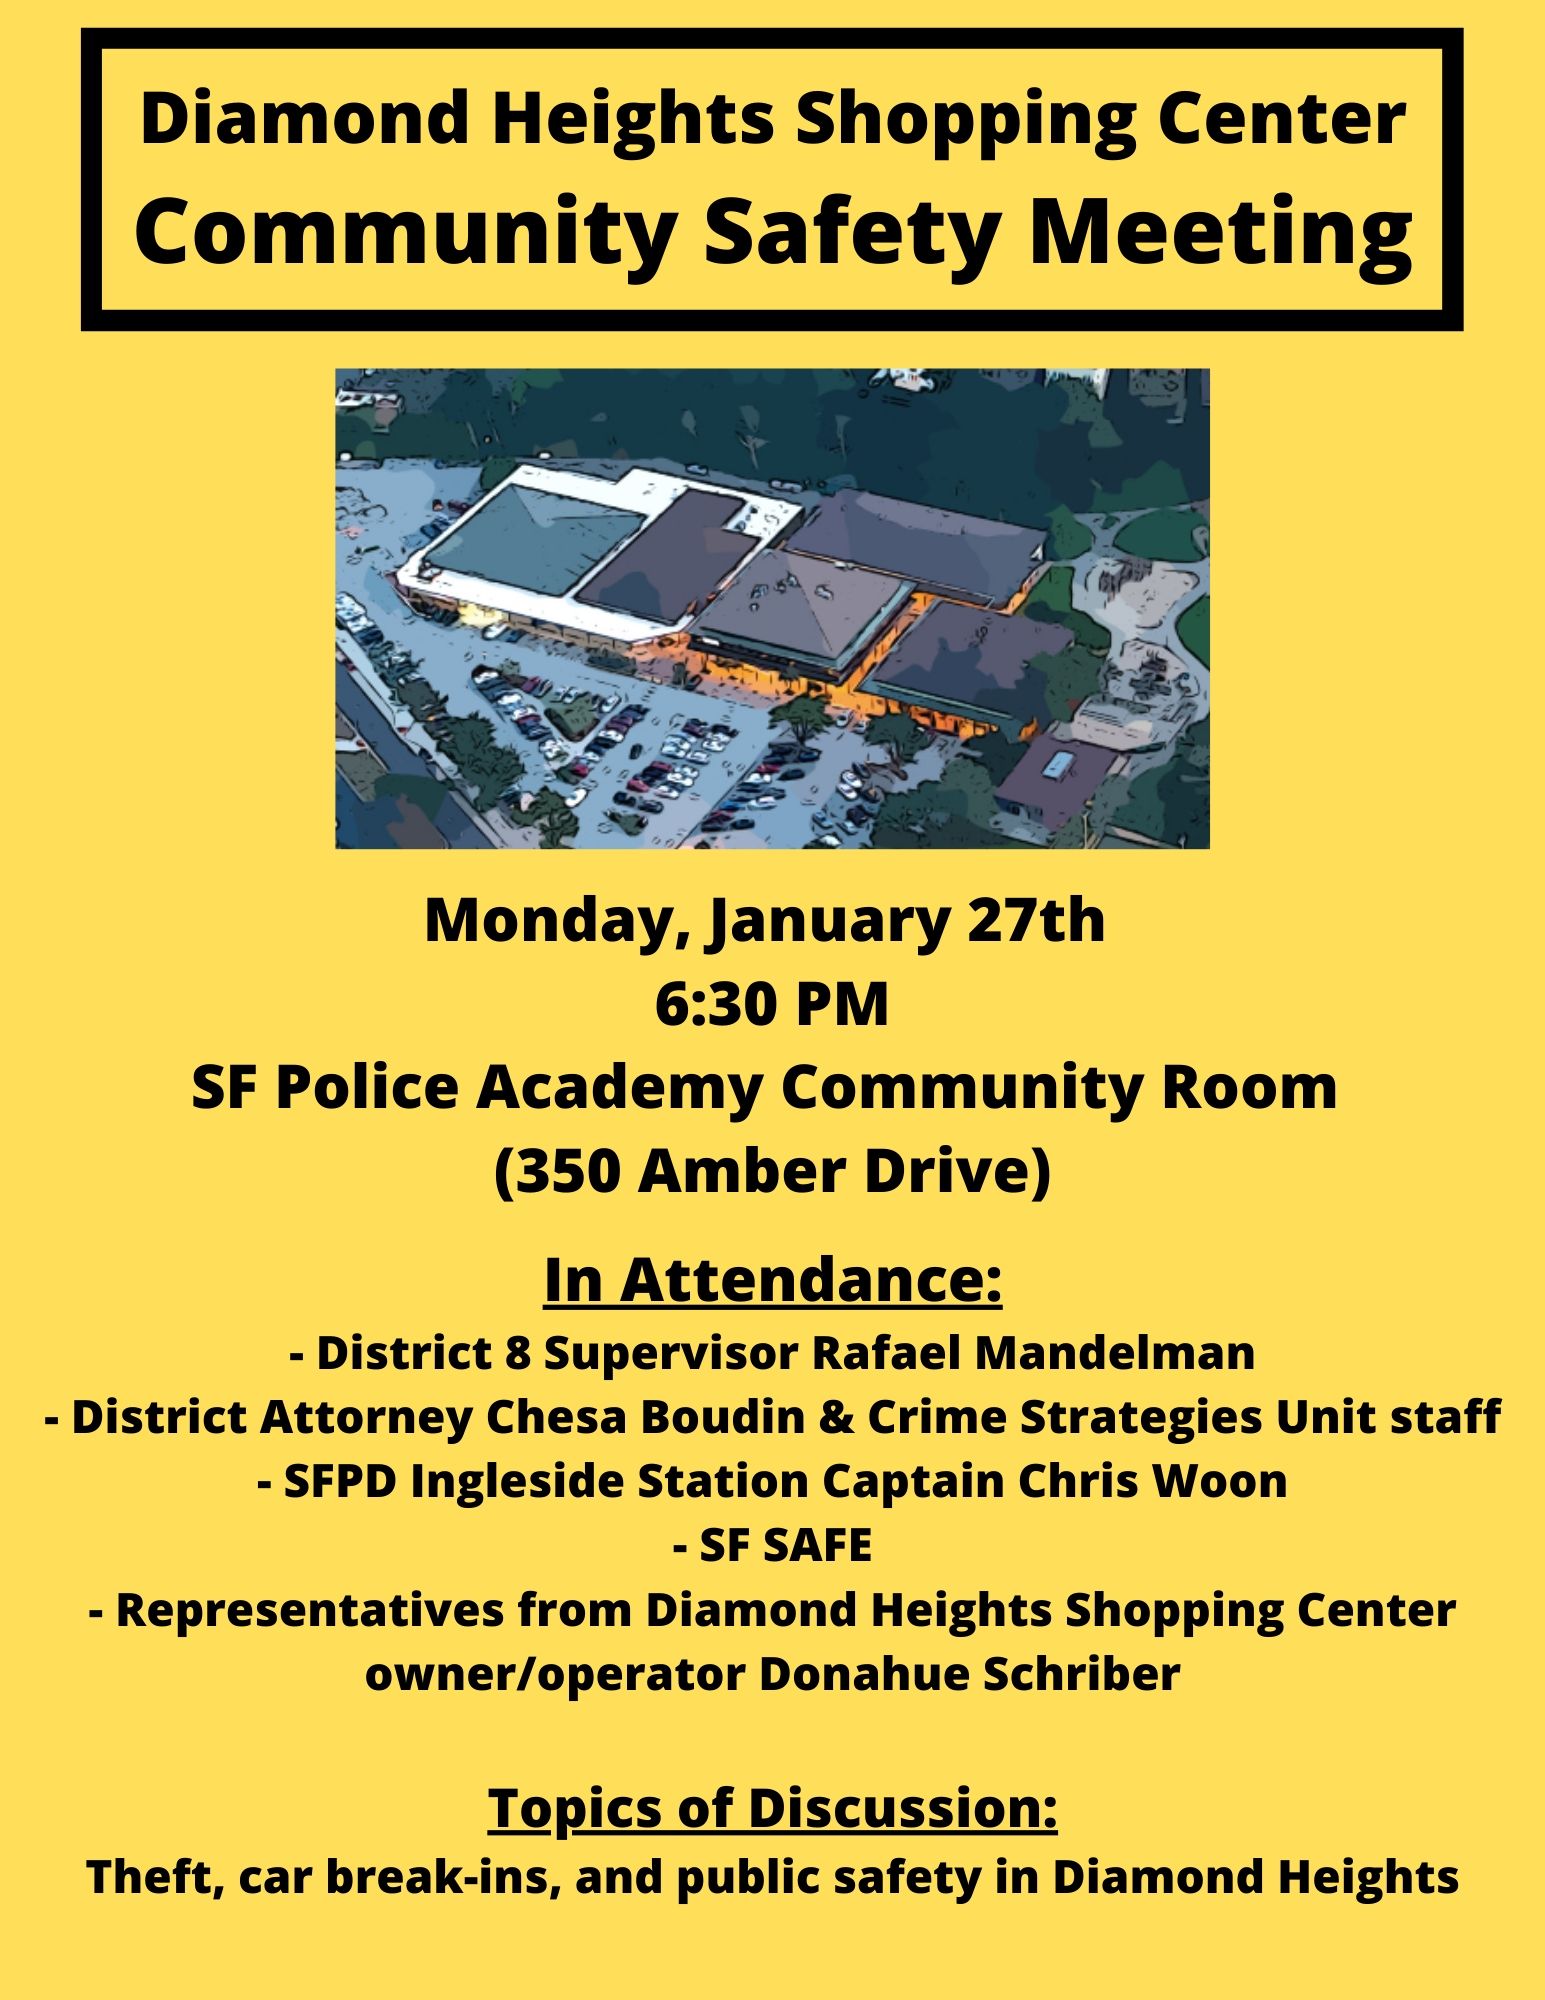 Flyer for Community Meeting